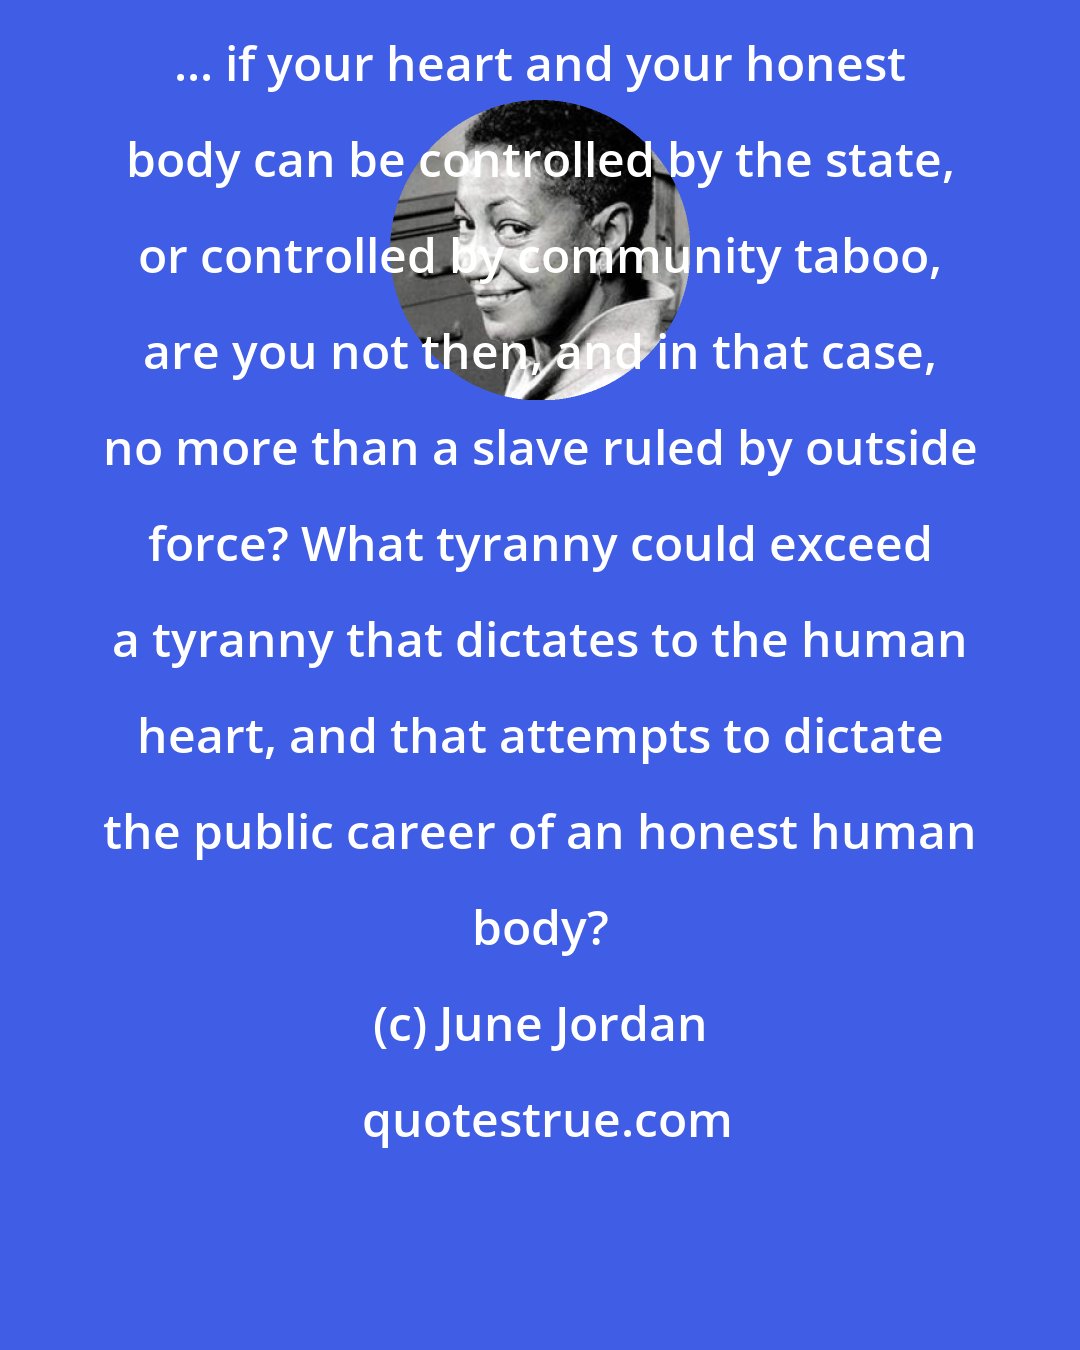 June Jordan: ... if your heart and your honest body can be controlled by the state, or controlled by community taboo, are you not then, and in that case, no more than a slave ruled by outside force? What tyranny could exceed a tyranny that dictates to the human heart, and that attempts to dictate the public career of an honest human body?